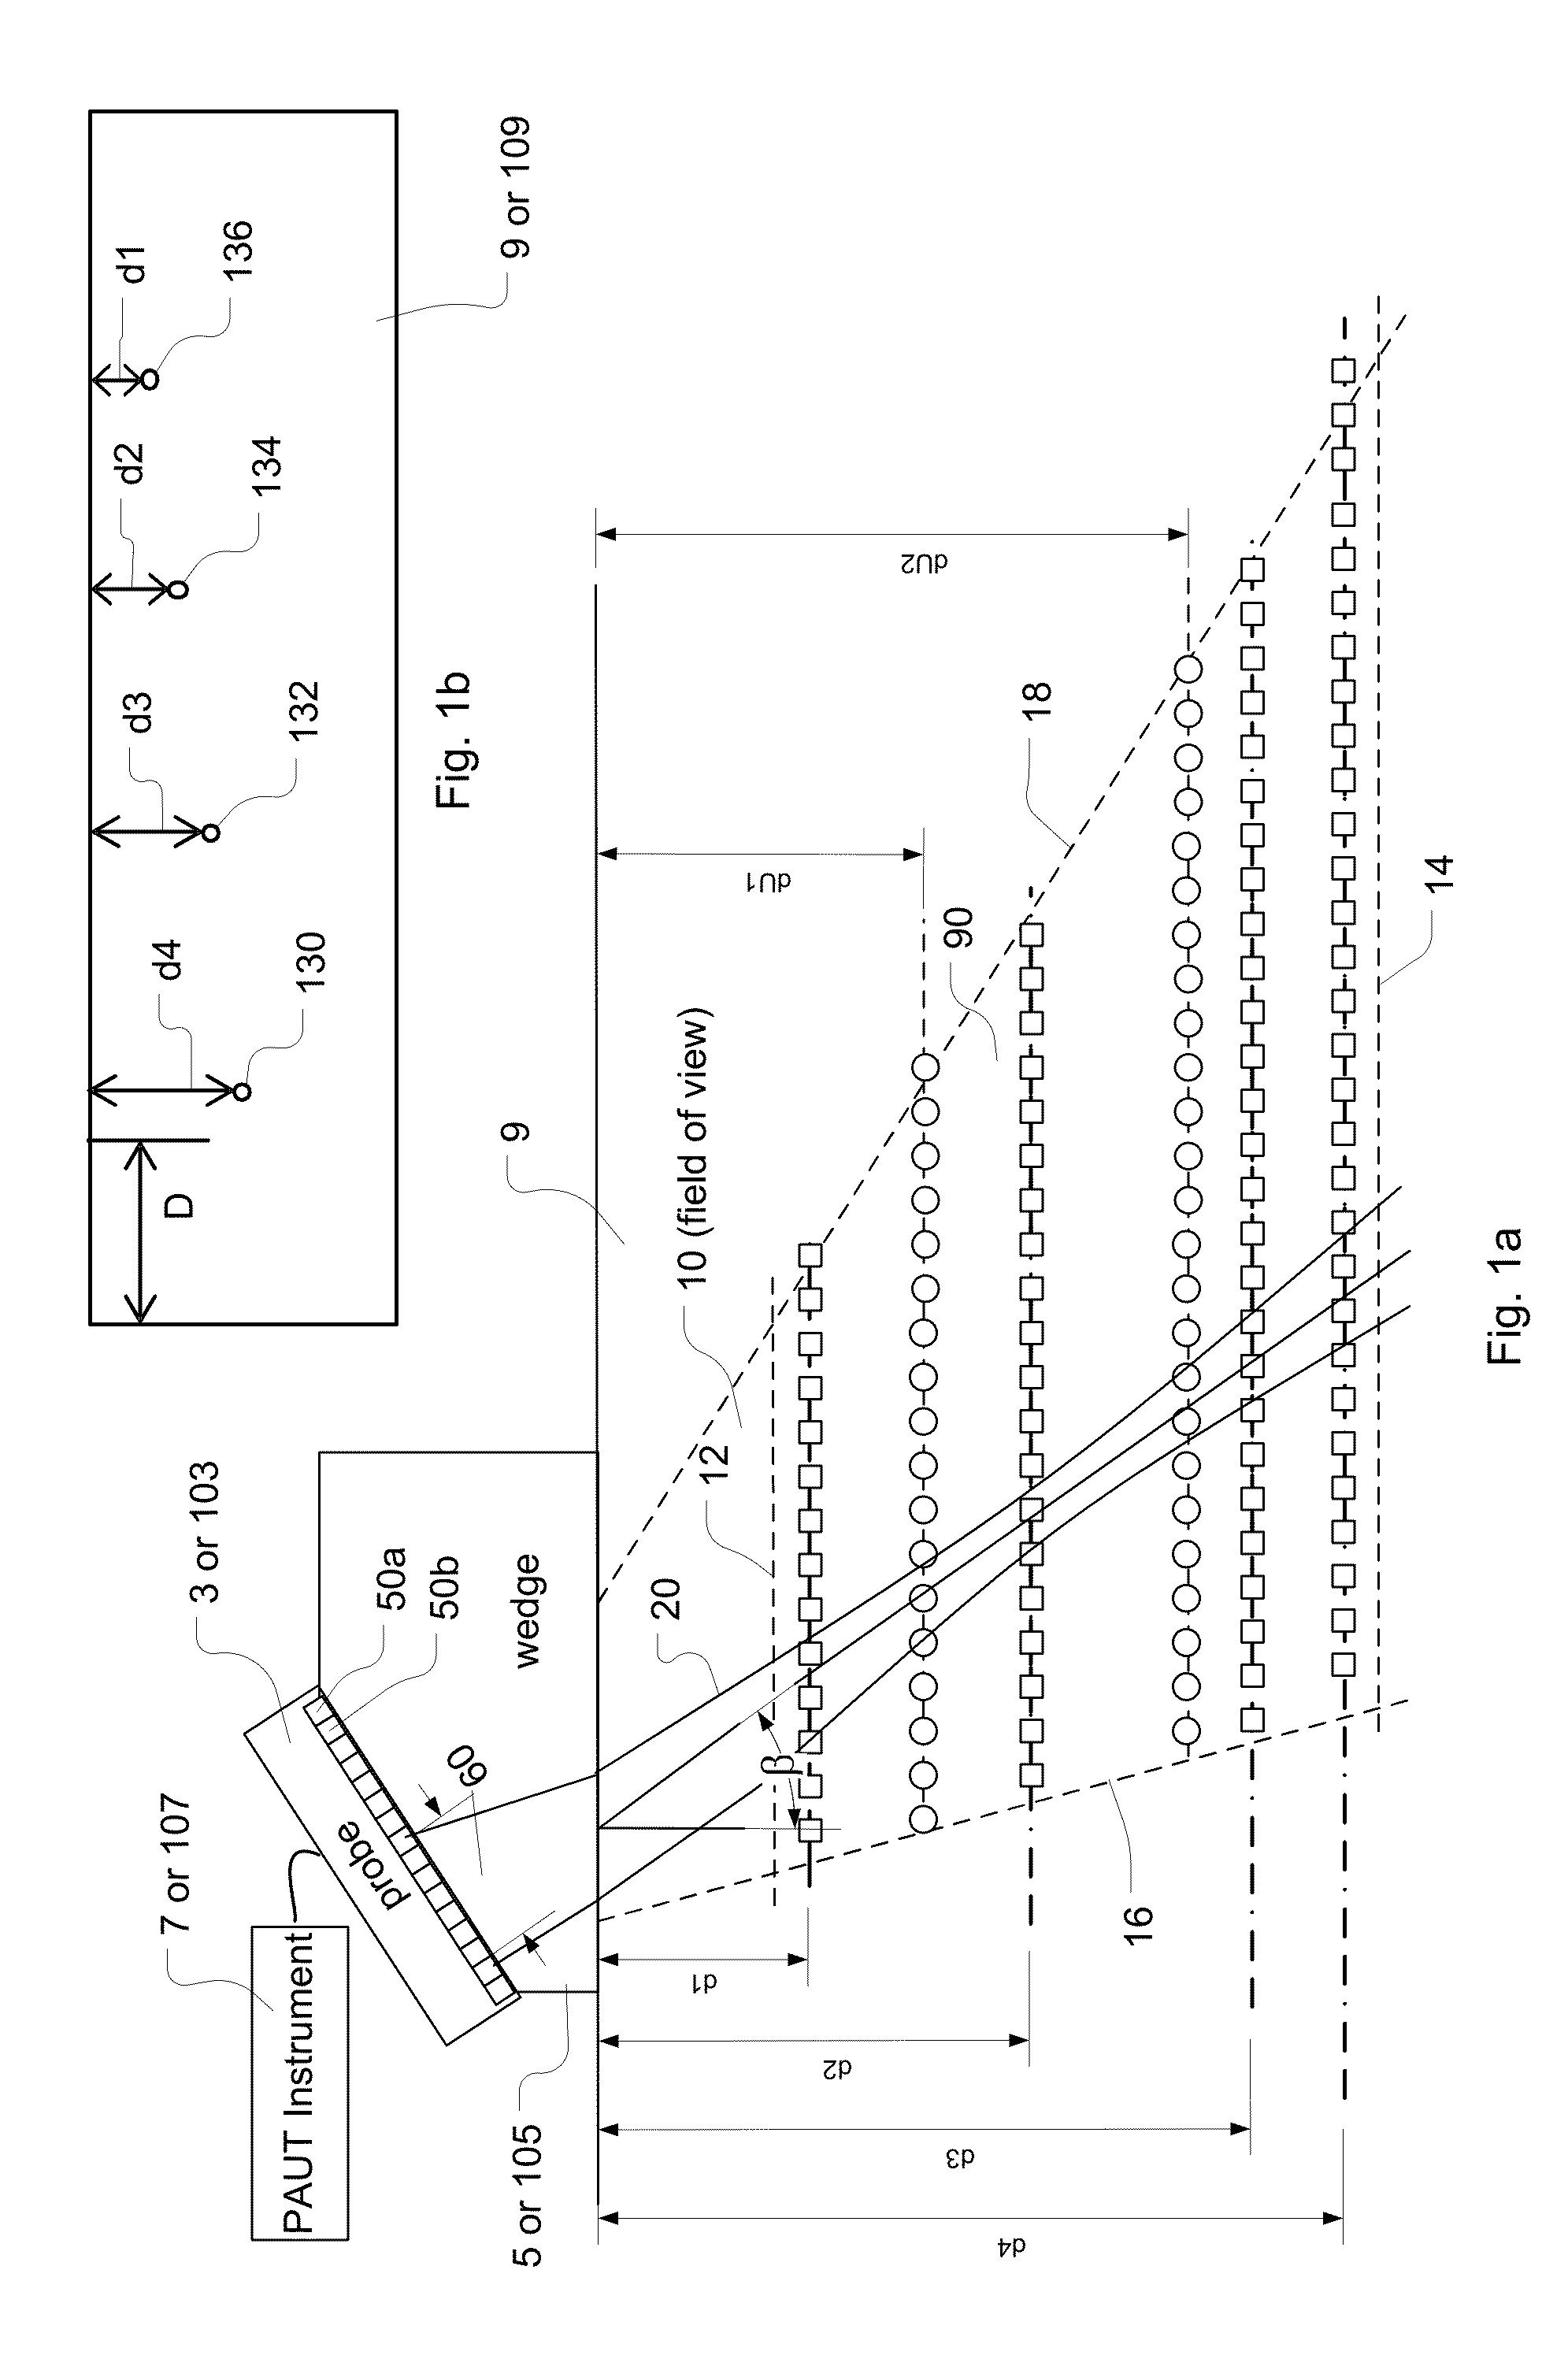 Phased array system capable of computing gains for non-measured calibration points